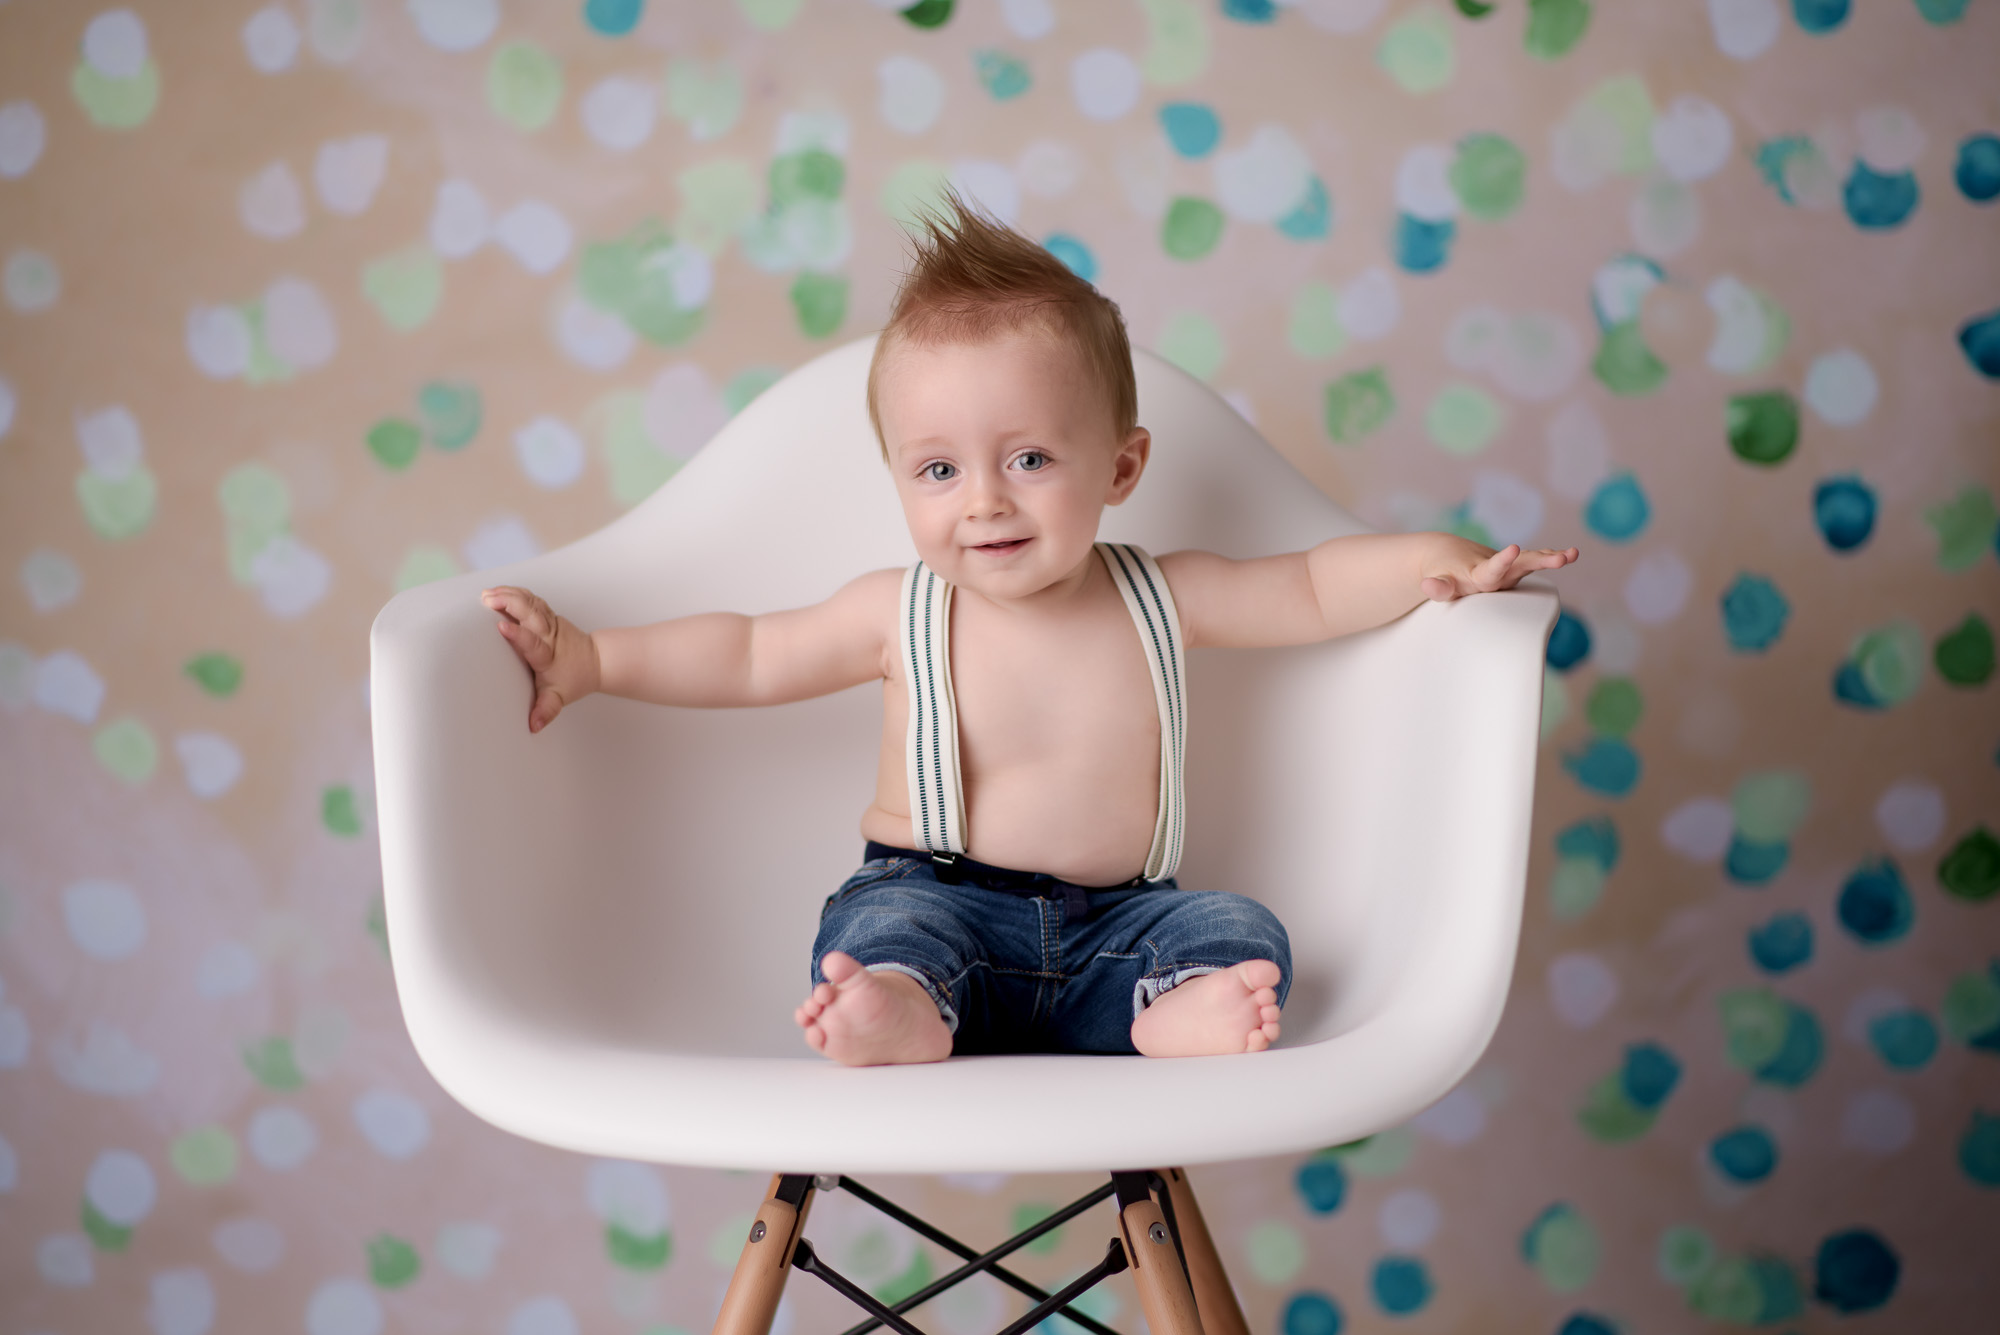 Baby Photography Session in Calgary - Baby Sitting on a Chair